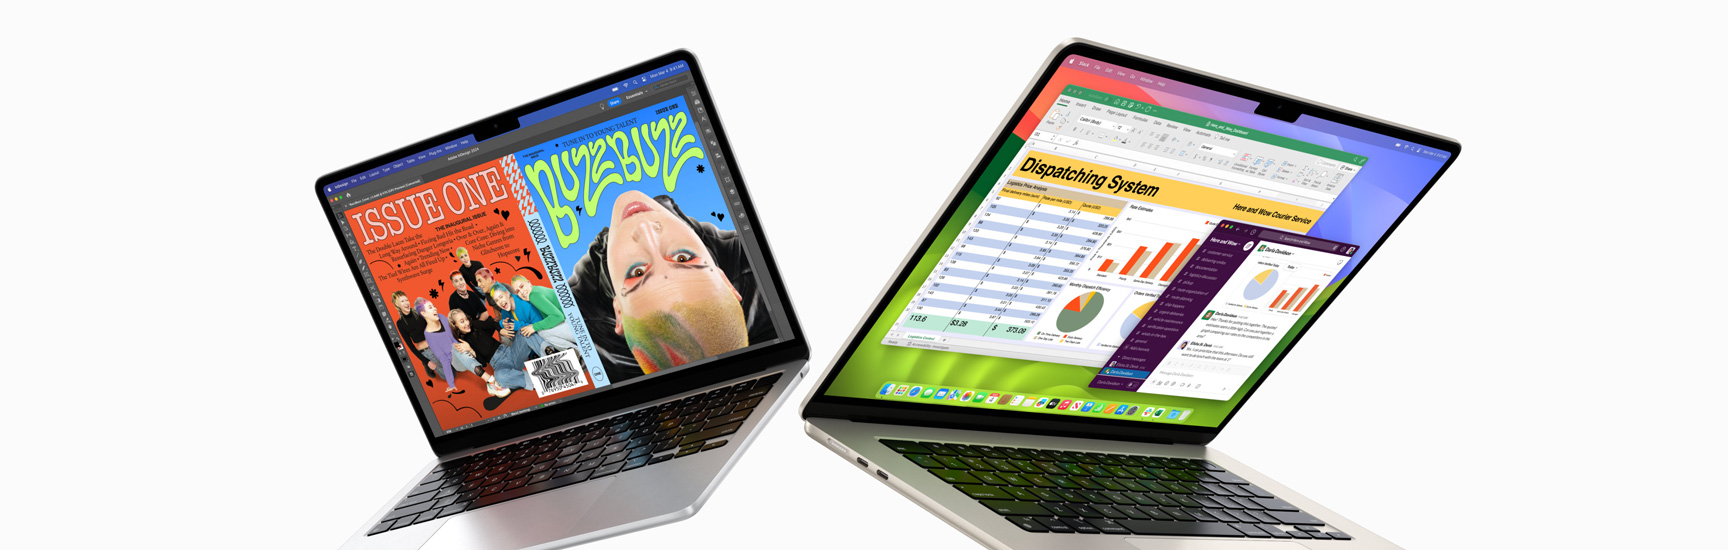 Partially open 13-inch MacBook Air on left and 15-inch MacBook Air on right. 13-inch screen shows colourful magazine cover created with In Design. 15-inch screen shows Microsoft Excel and Slack.